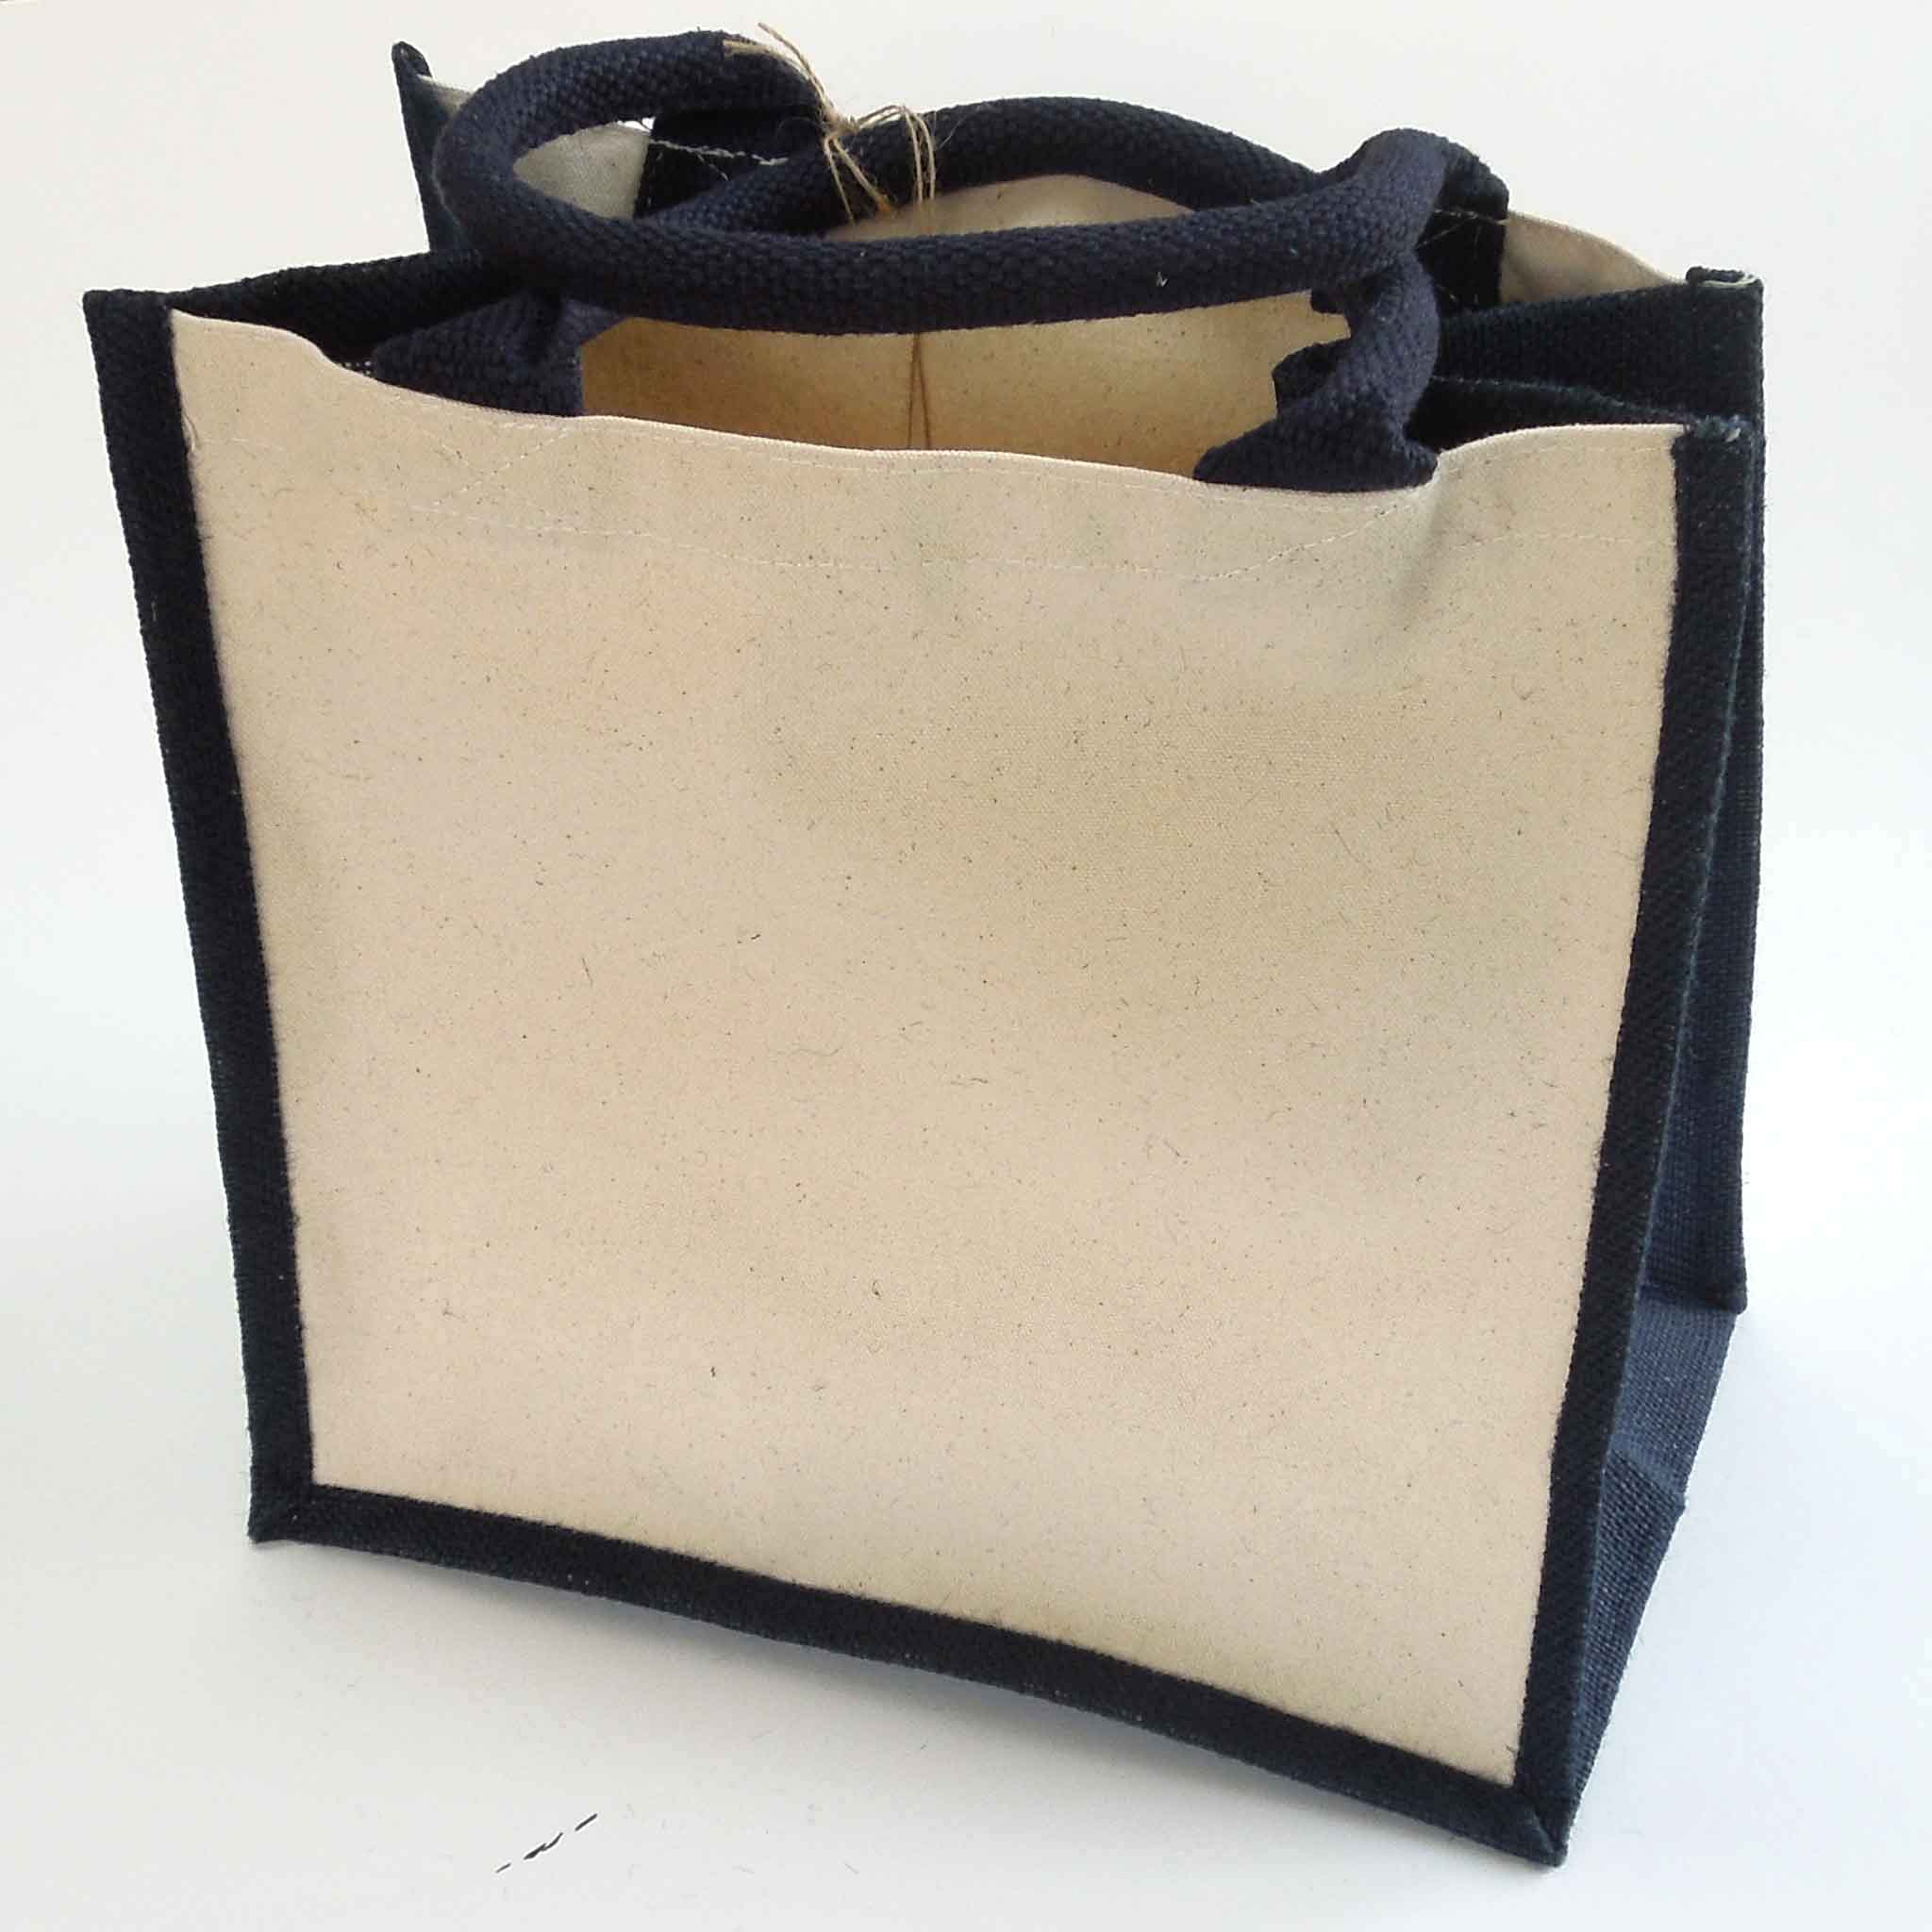 Cotton Canvas and Jute Bag with Blue Padded Handles